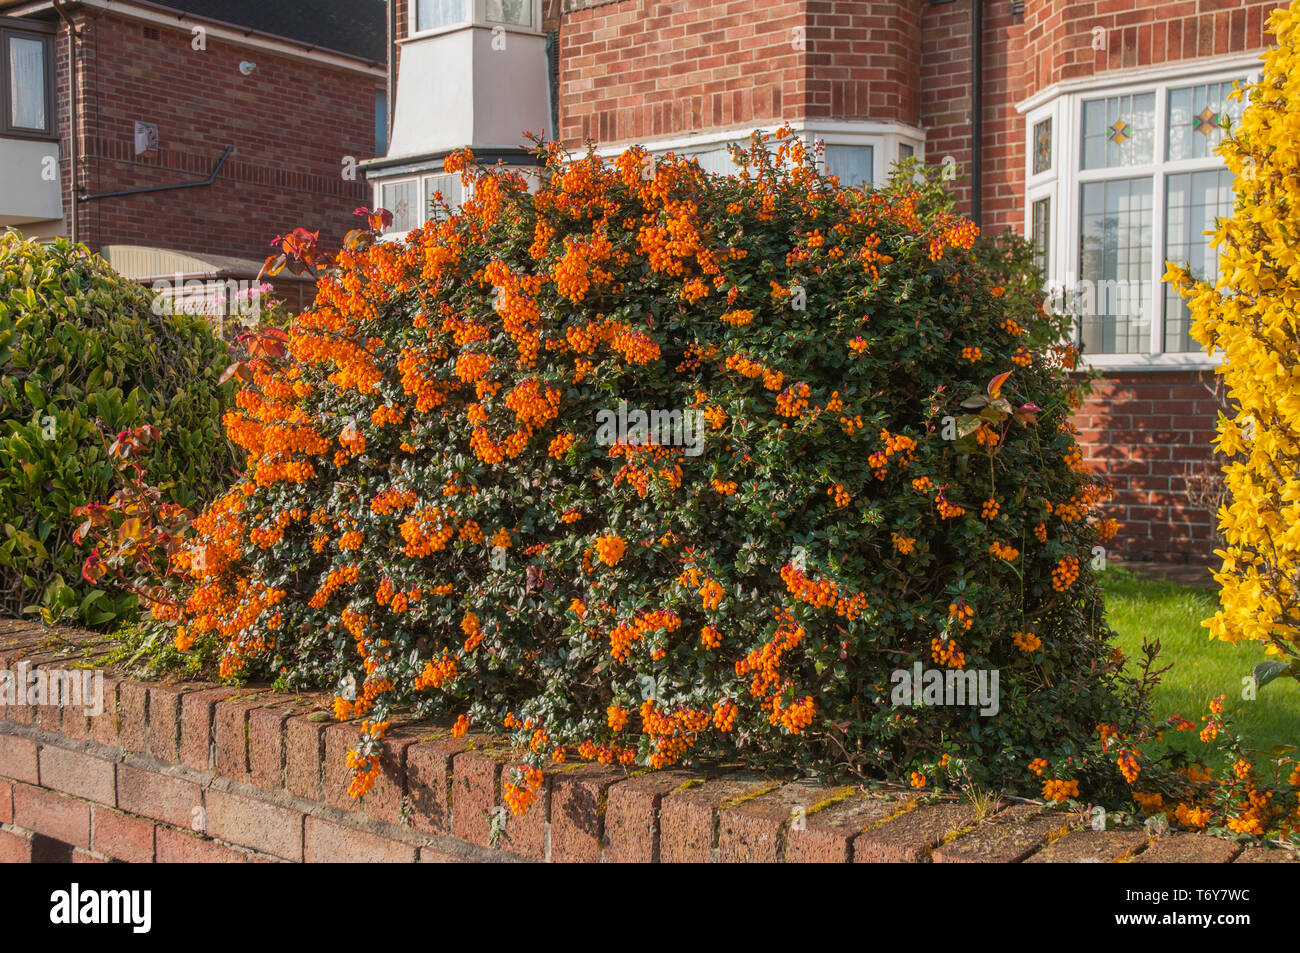 Berberis darwinii trimmed into a ball shape and covered  in orange flowers Stock Photo